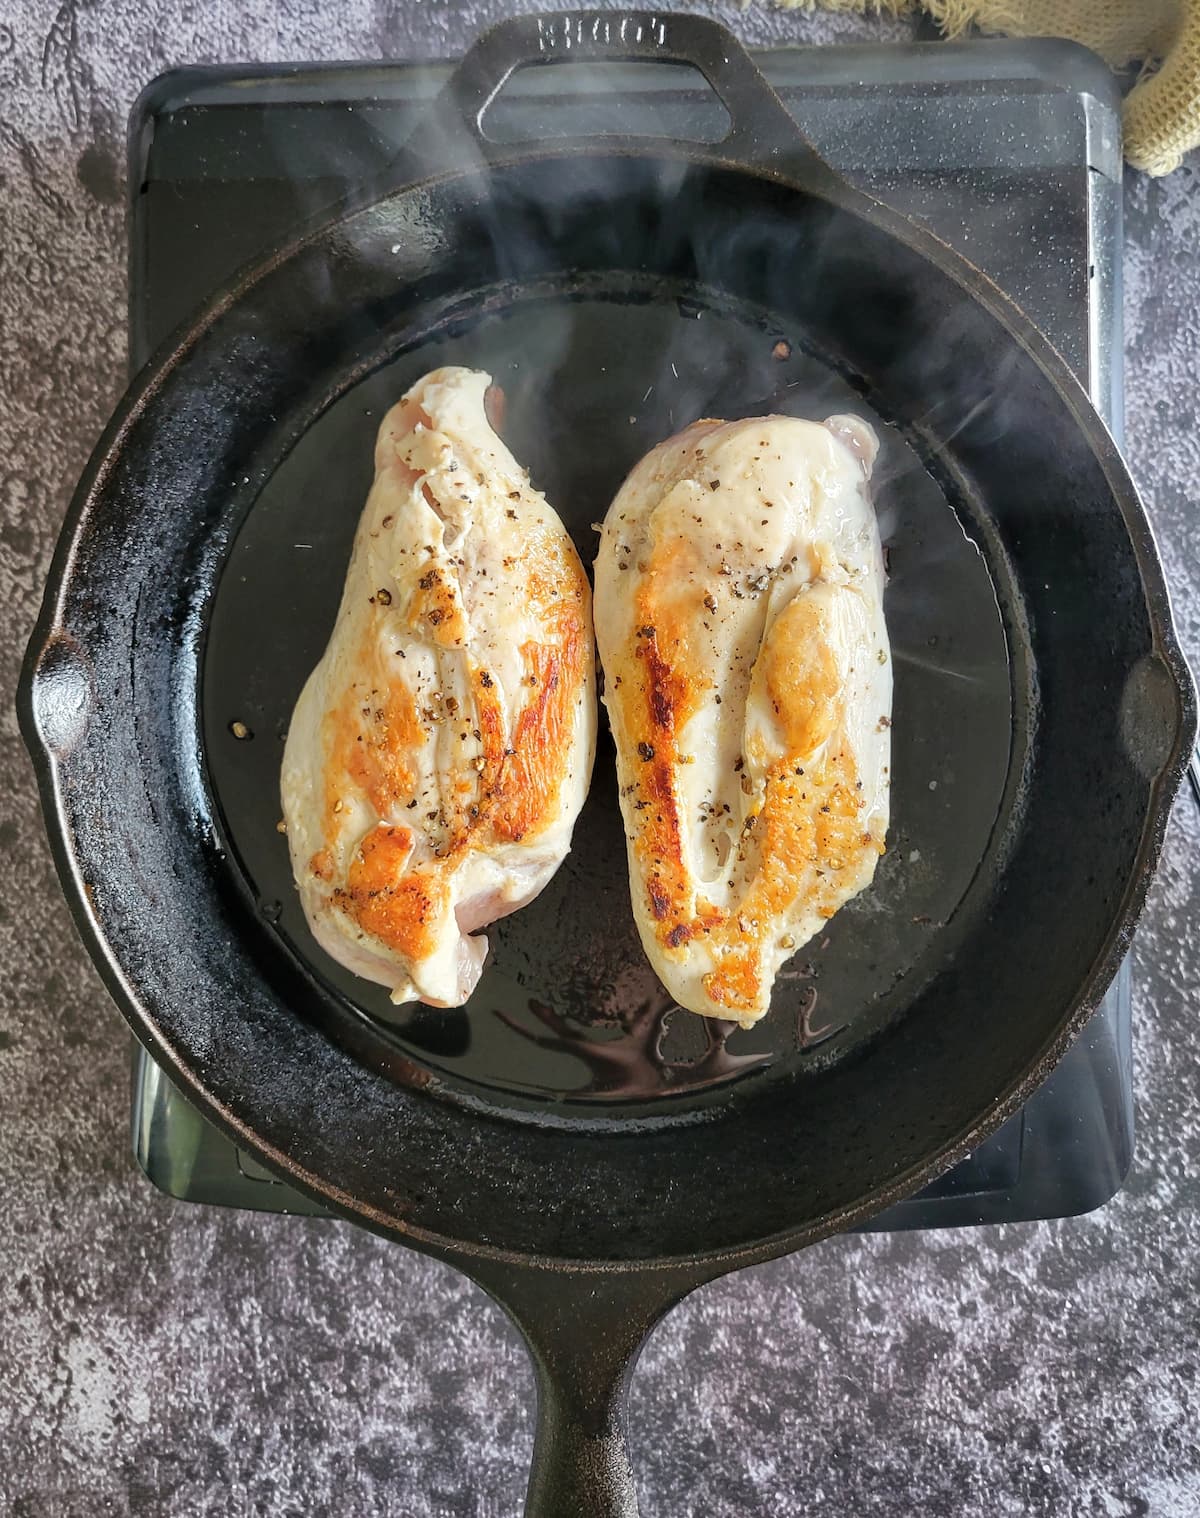 two seasoned chicken breasts searing in a cast iron skillet on a burner, tops are golden brown